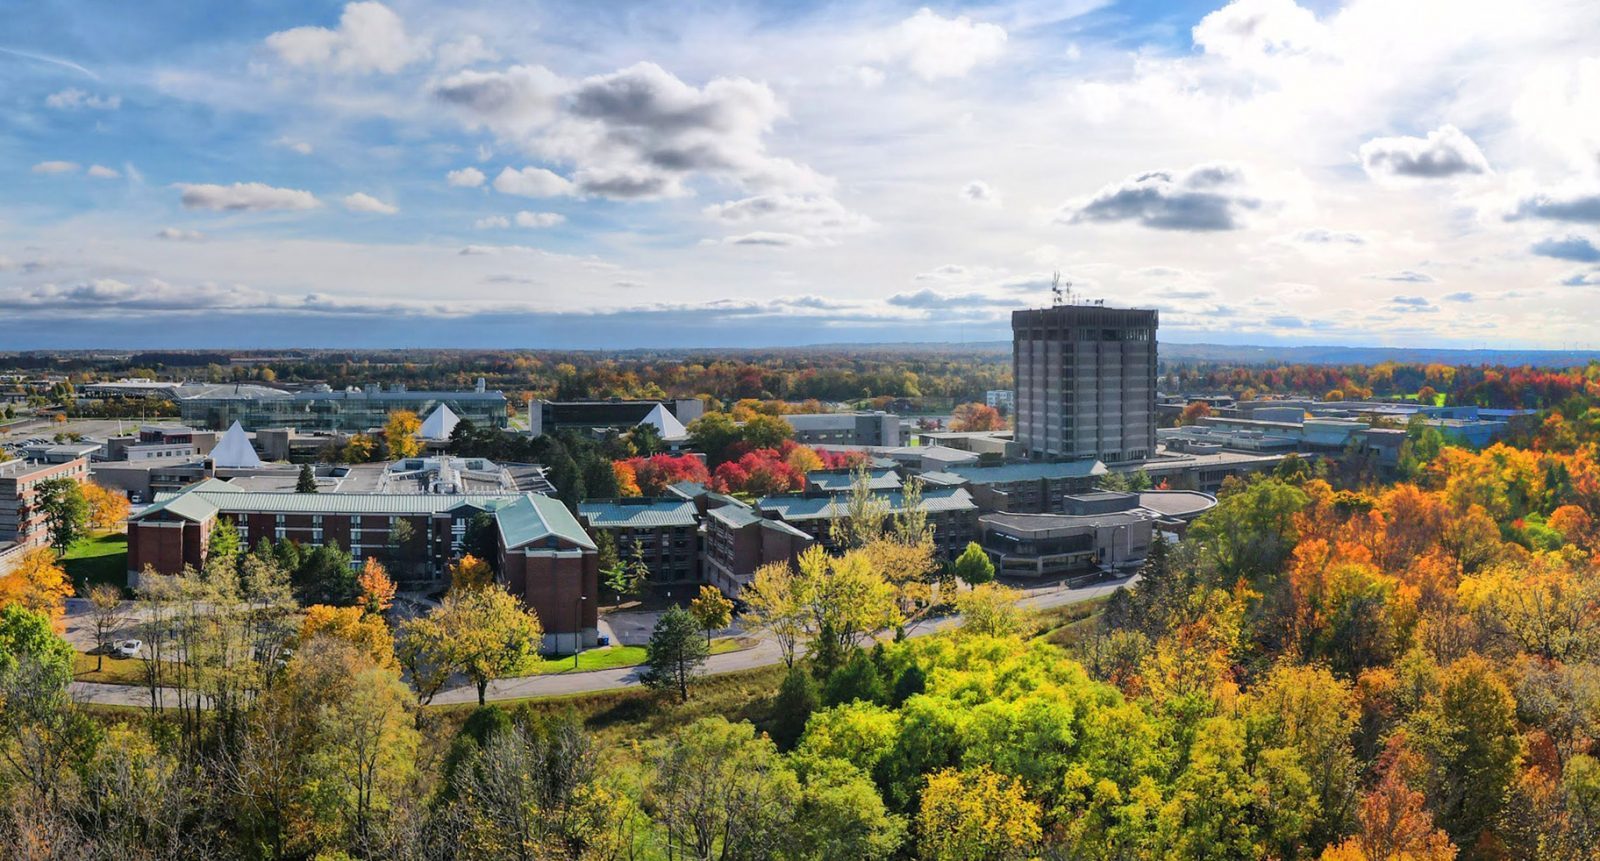 An aerial photograph of Brock University. A campus filled with buildings is surrounded by greenspace. Some of the trees' leaves have turned red, orange and yellow for fall. In the distance, Lake Ontario glistens under a blue sky peppered with fluffy white clouds.